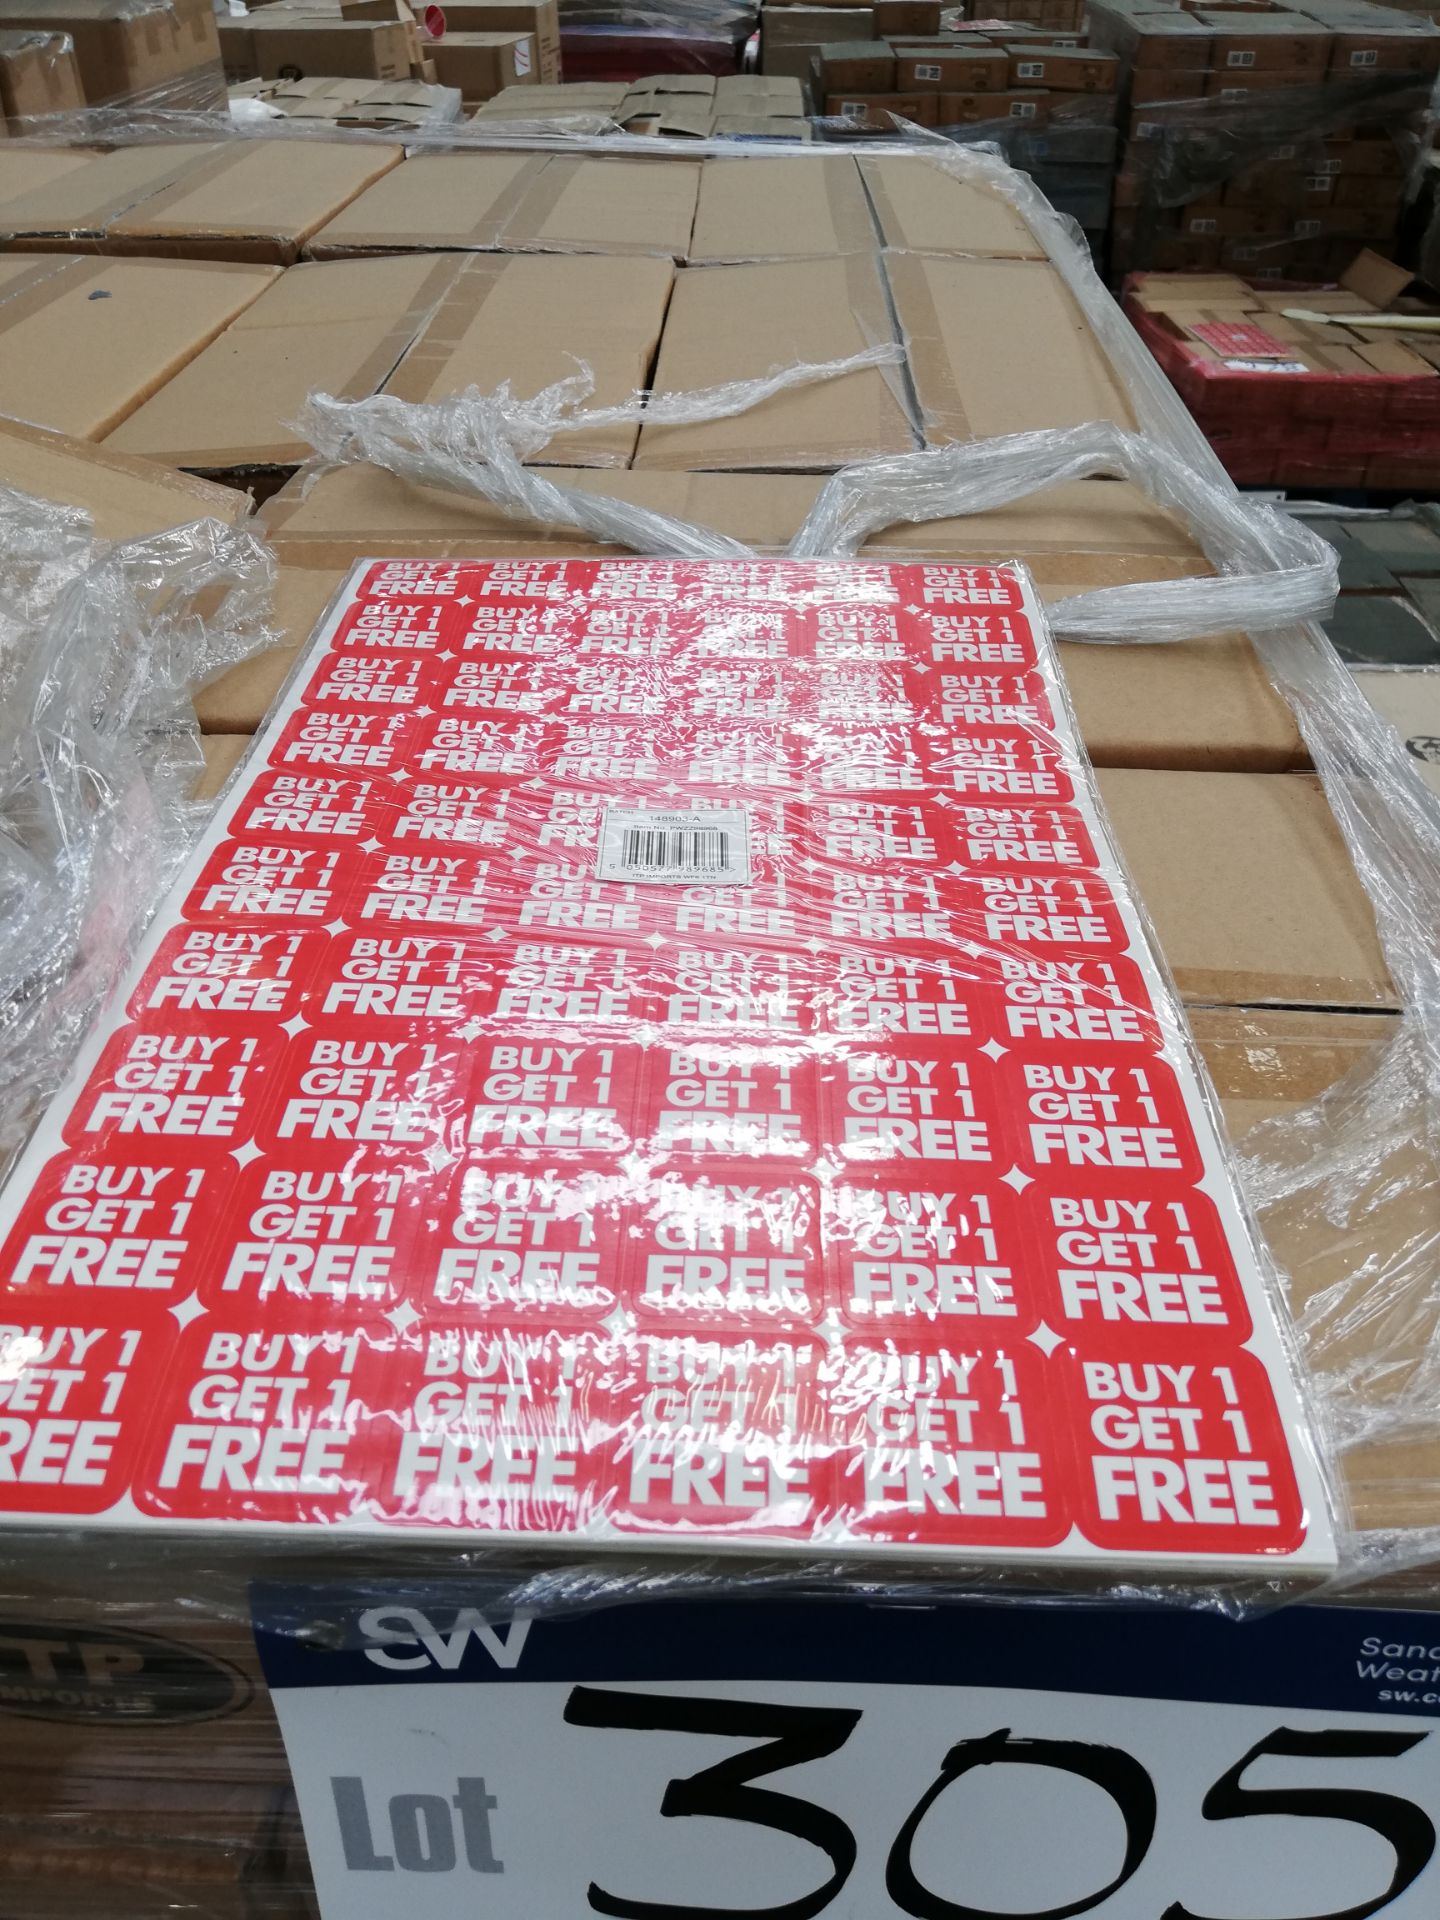 3,380 x Generic Sale Stickers ‘Buy 1 Get 1 Free’ - Image 2 of 2